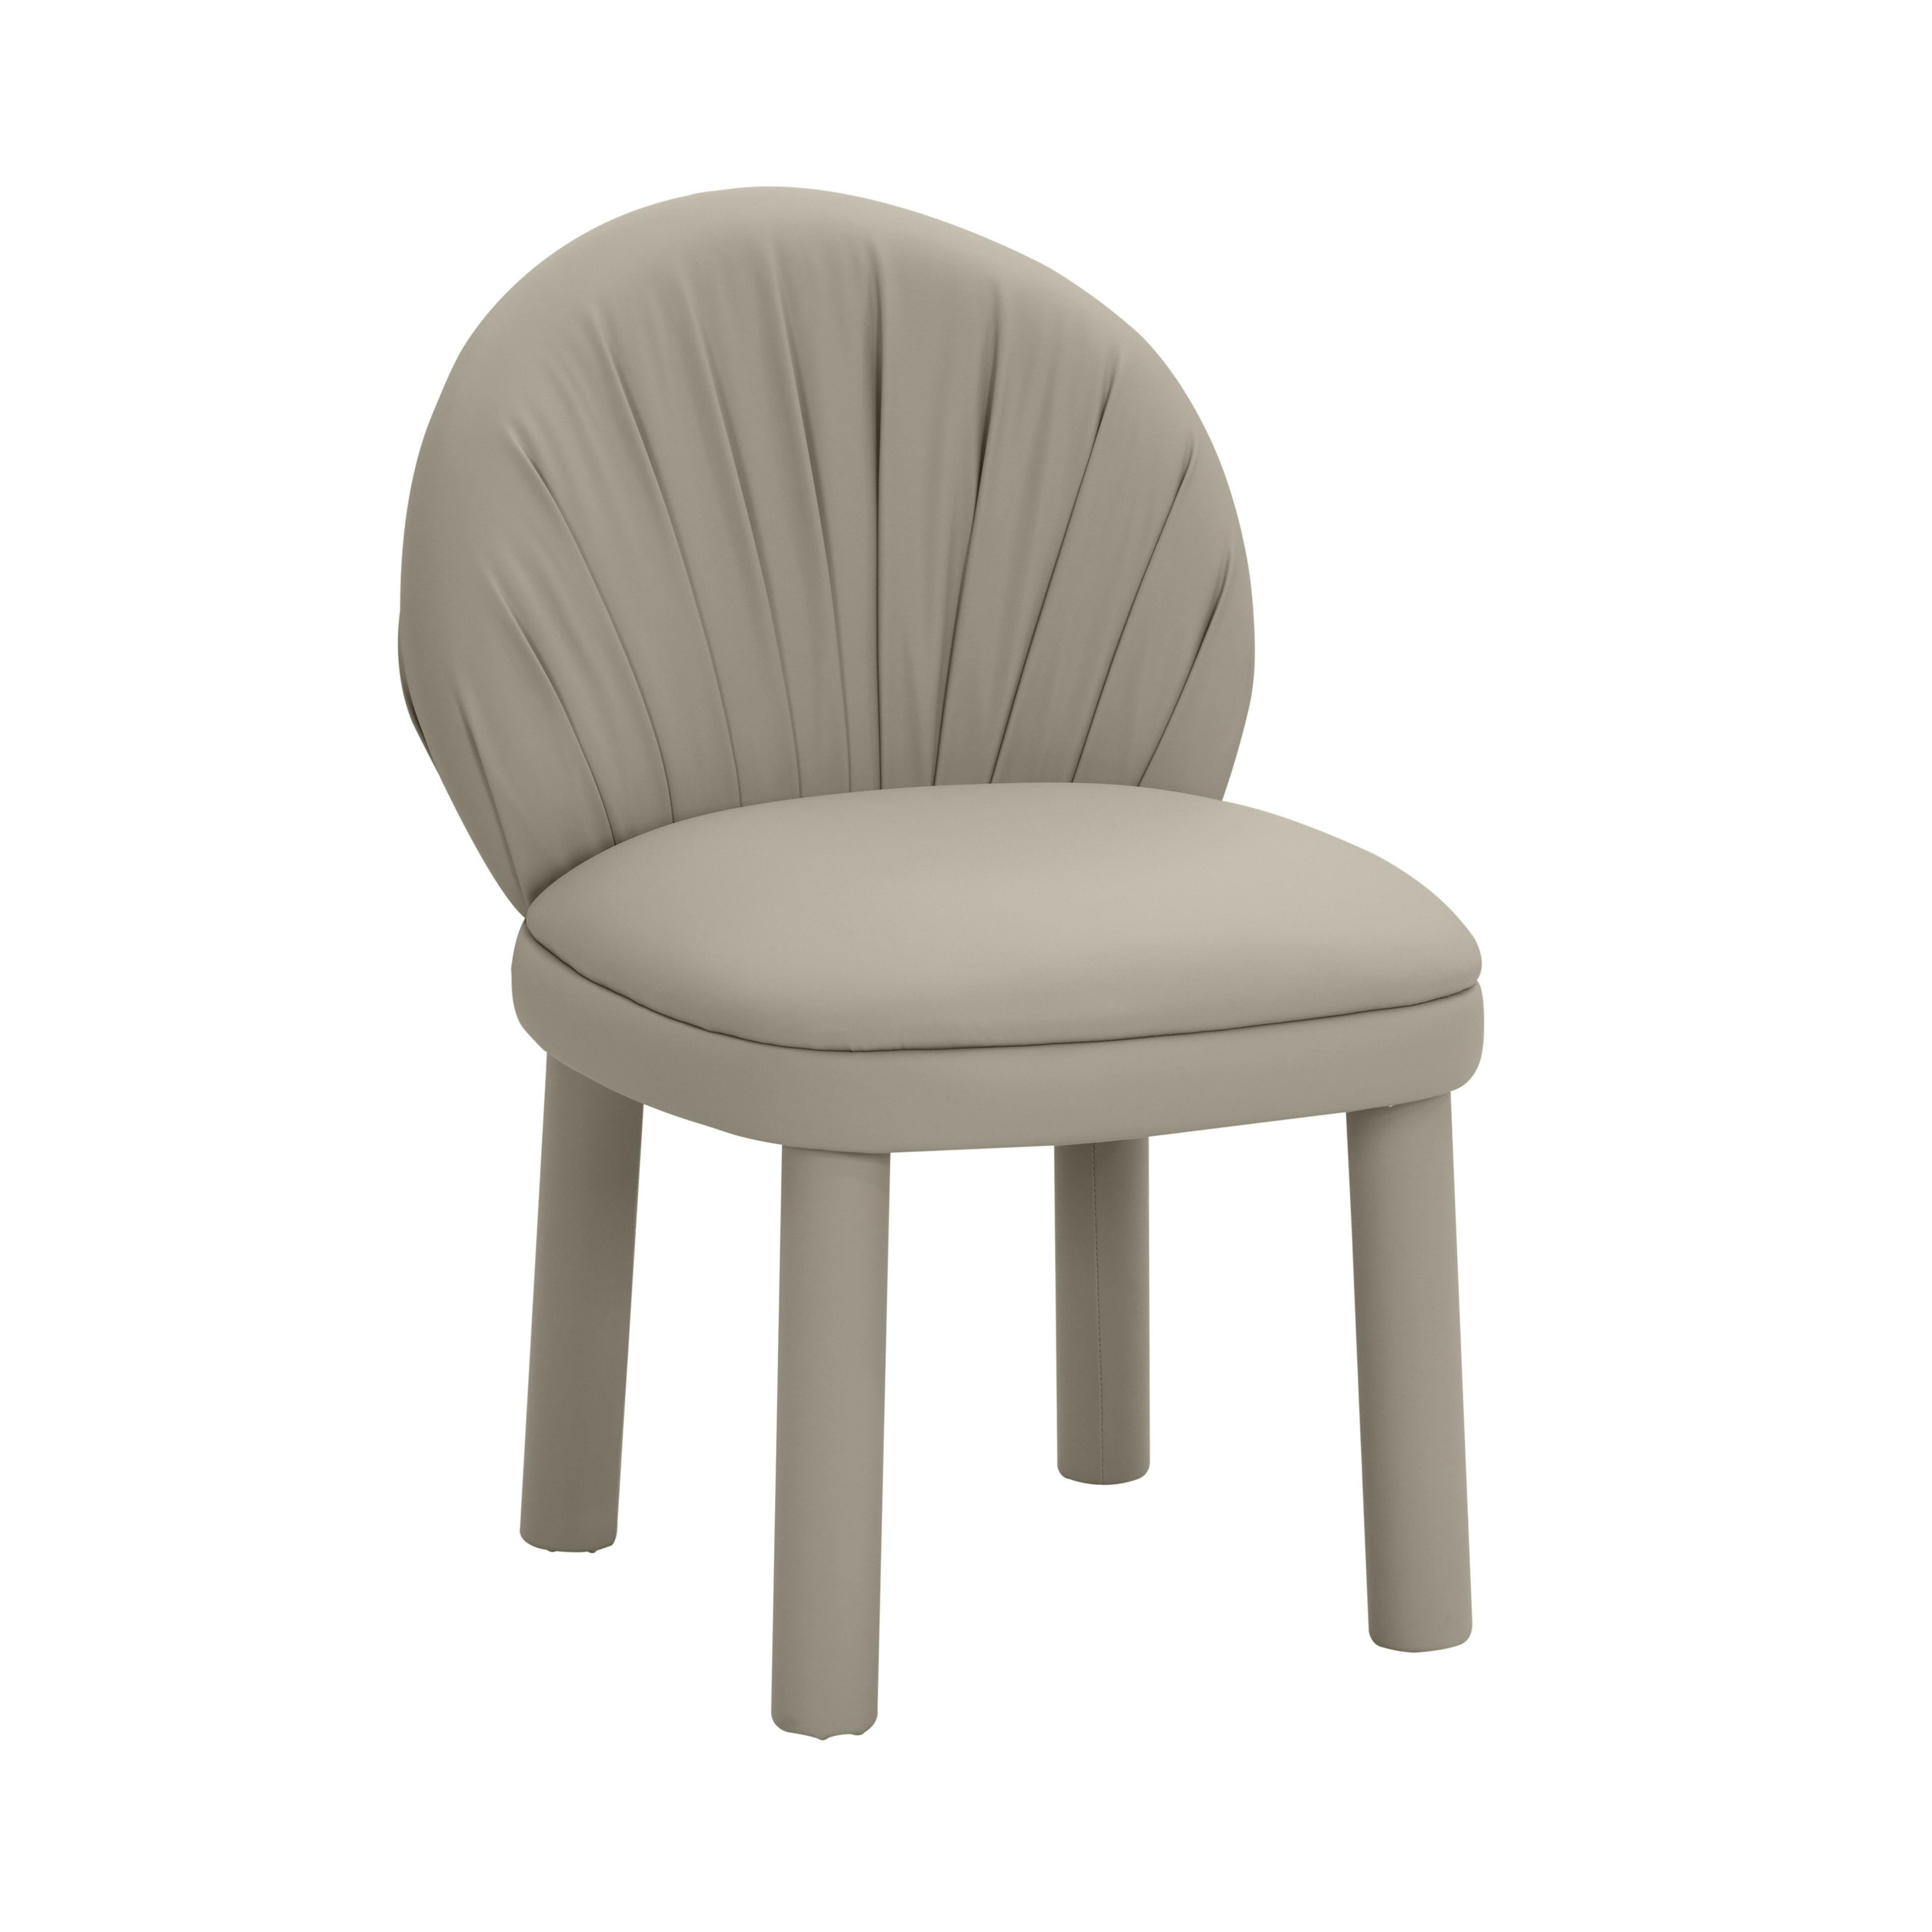 Tov Furniture Dining Chairs - Aliyah Grey Vegan Leather Dining Chair